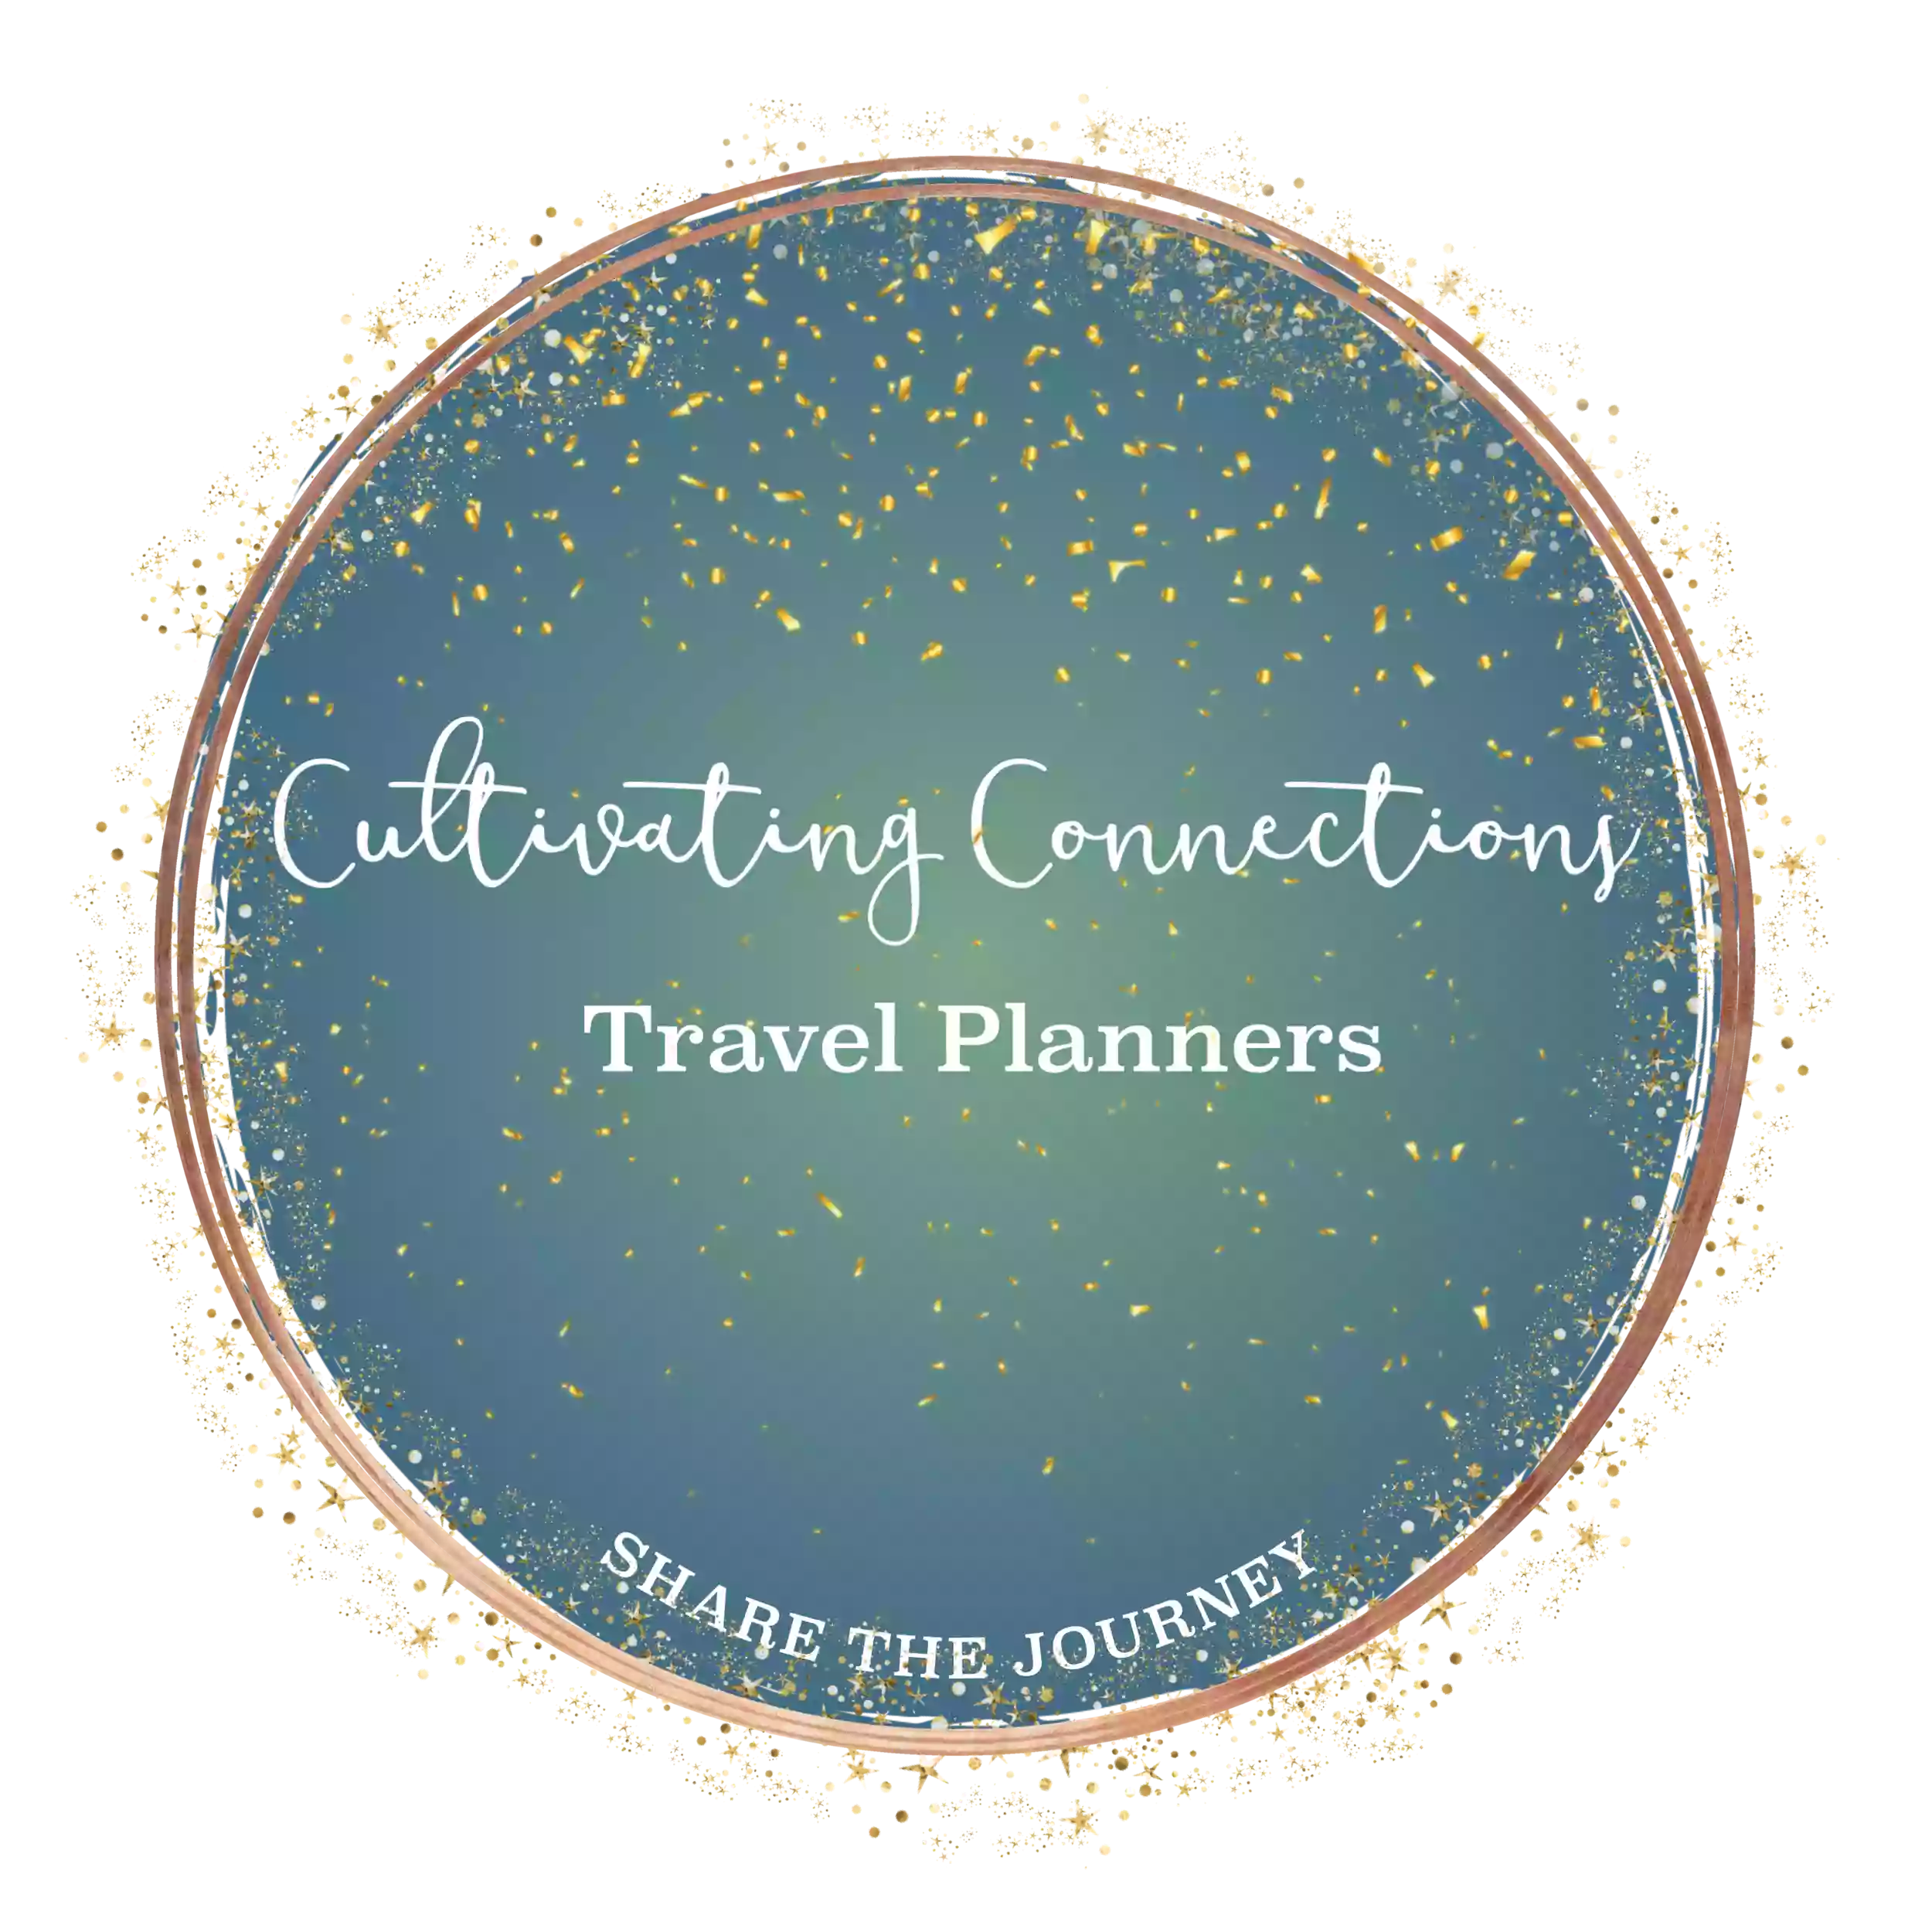 Cultivating Connections Travel Planners